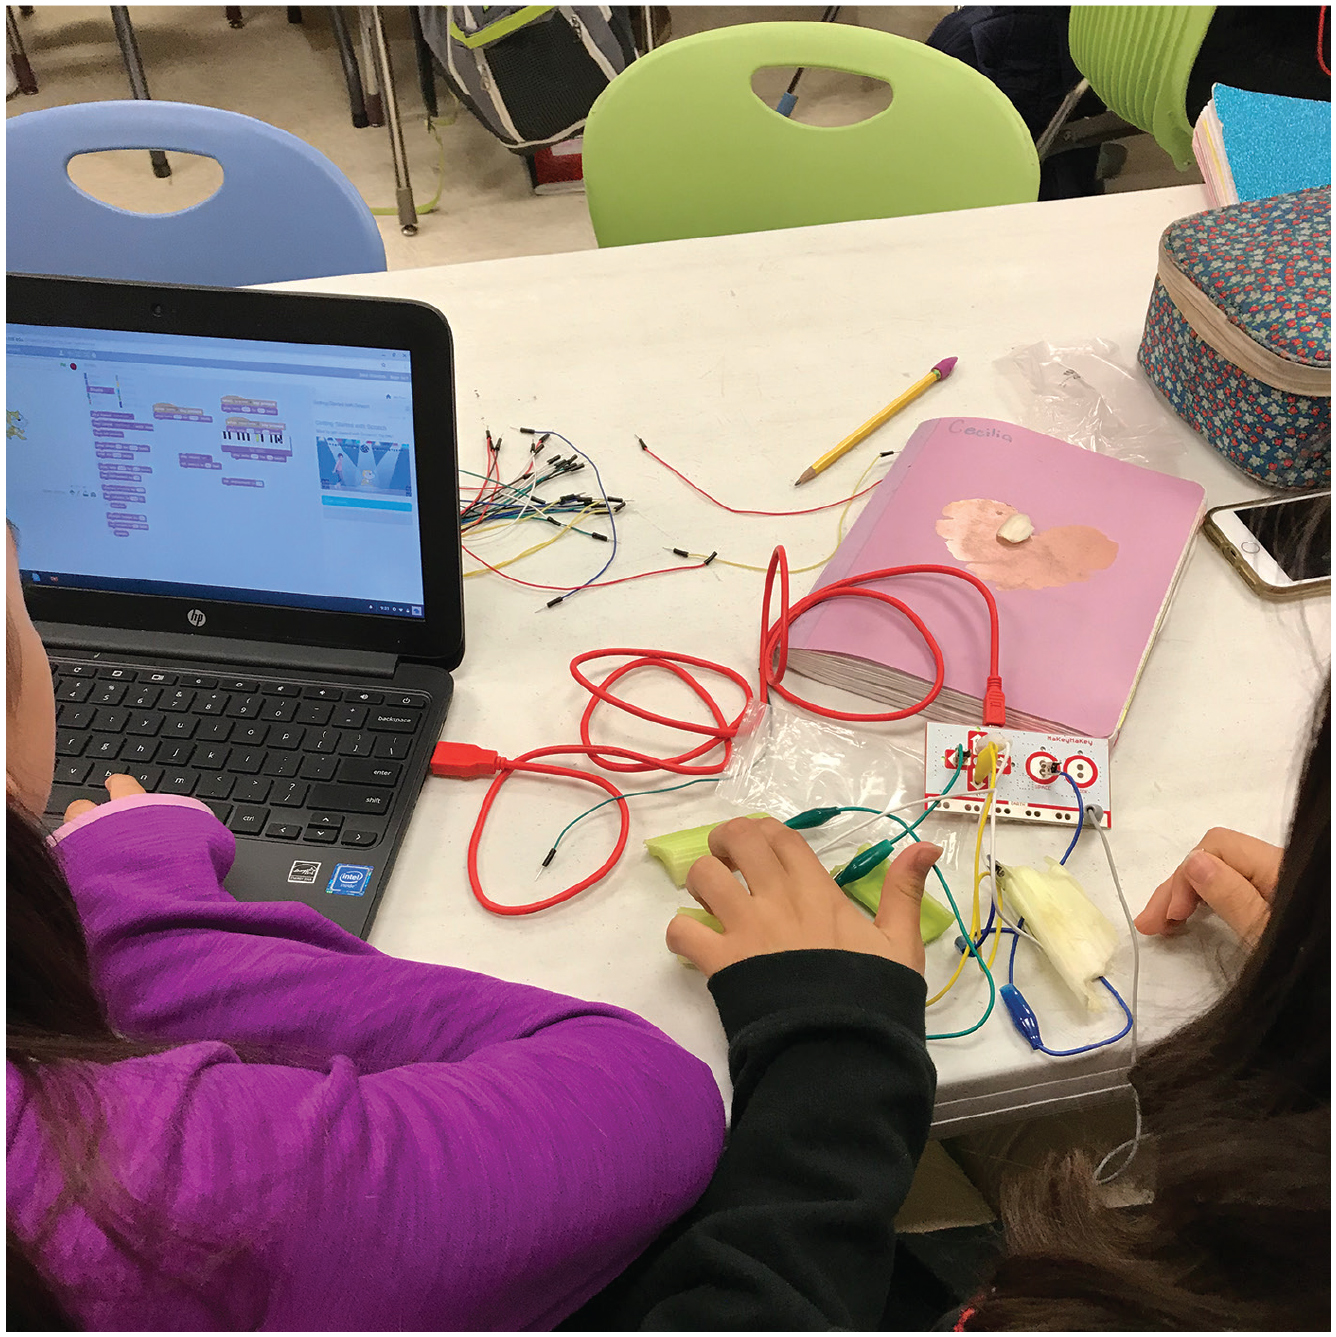 Students make musical celery with Scratch and Makey Makey.